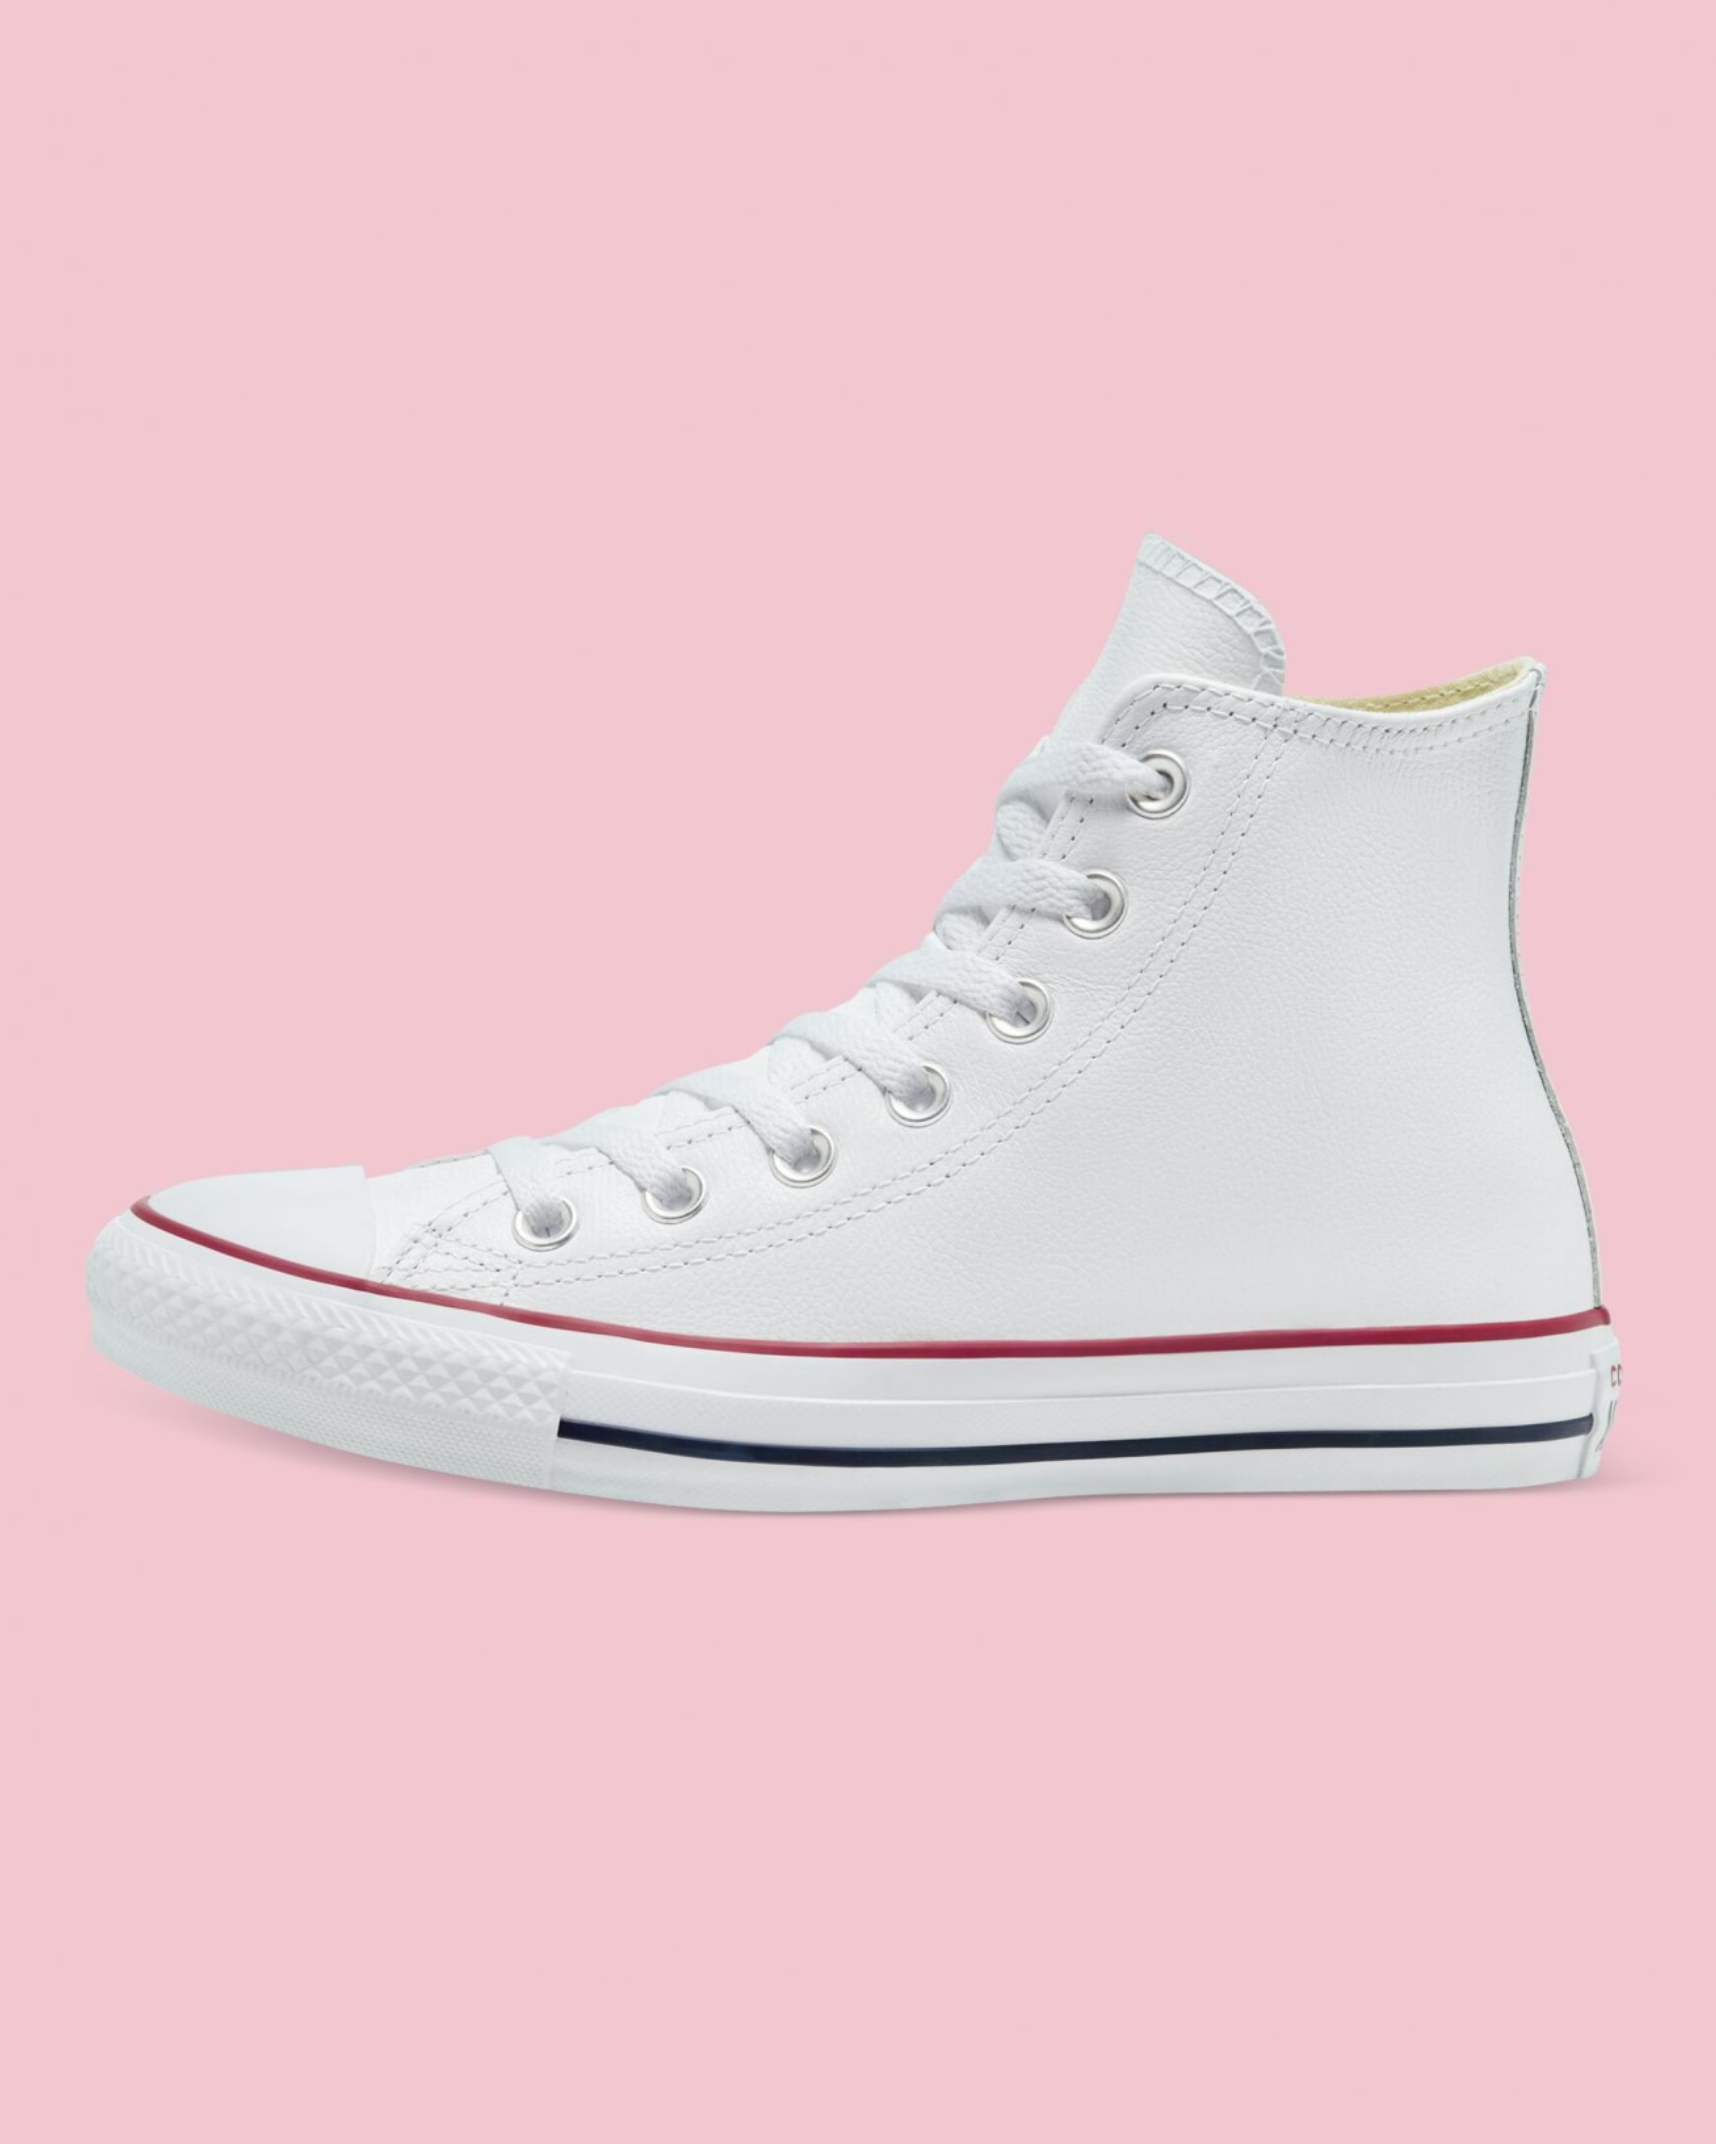 Converse Chuck Taylor Leather High Top - White